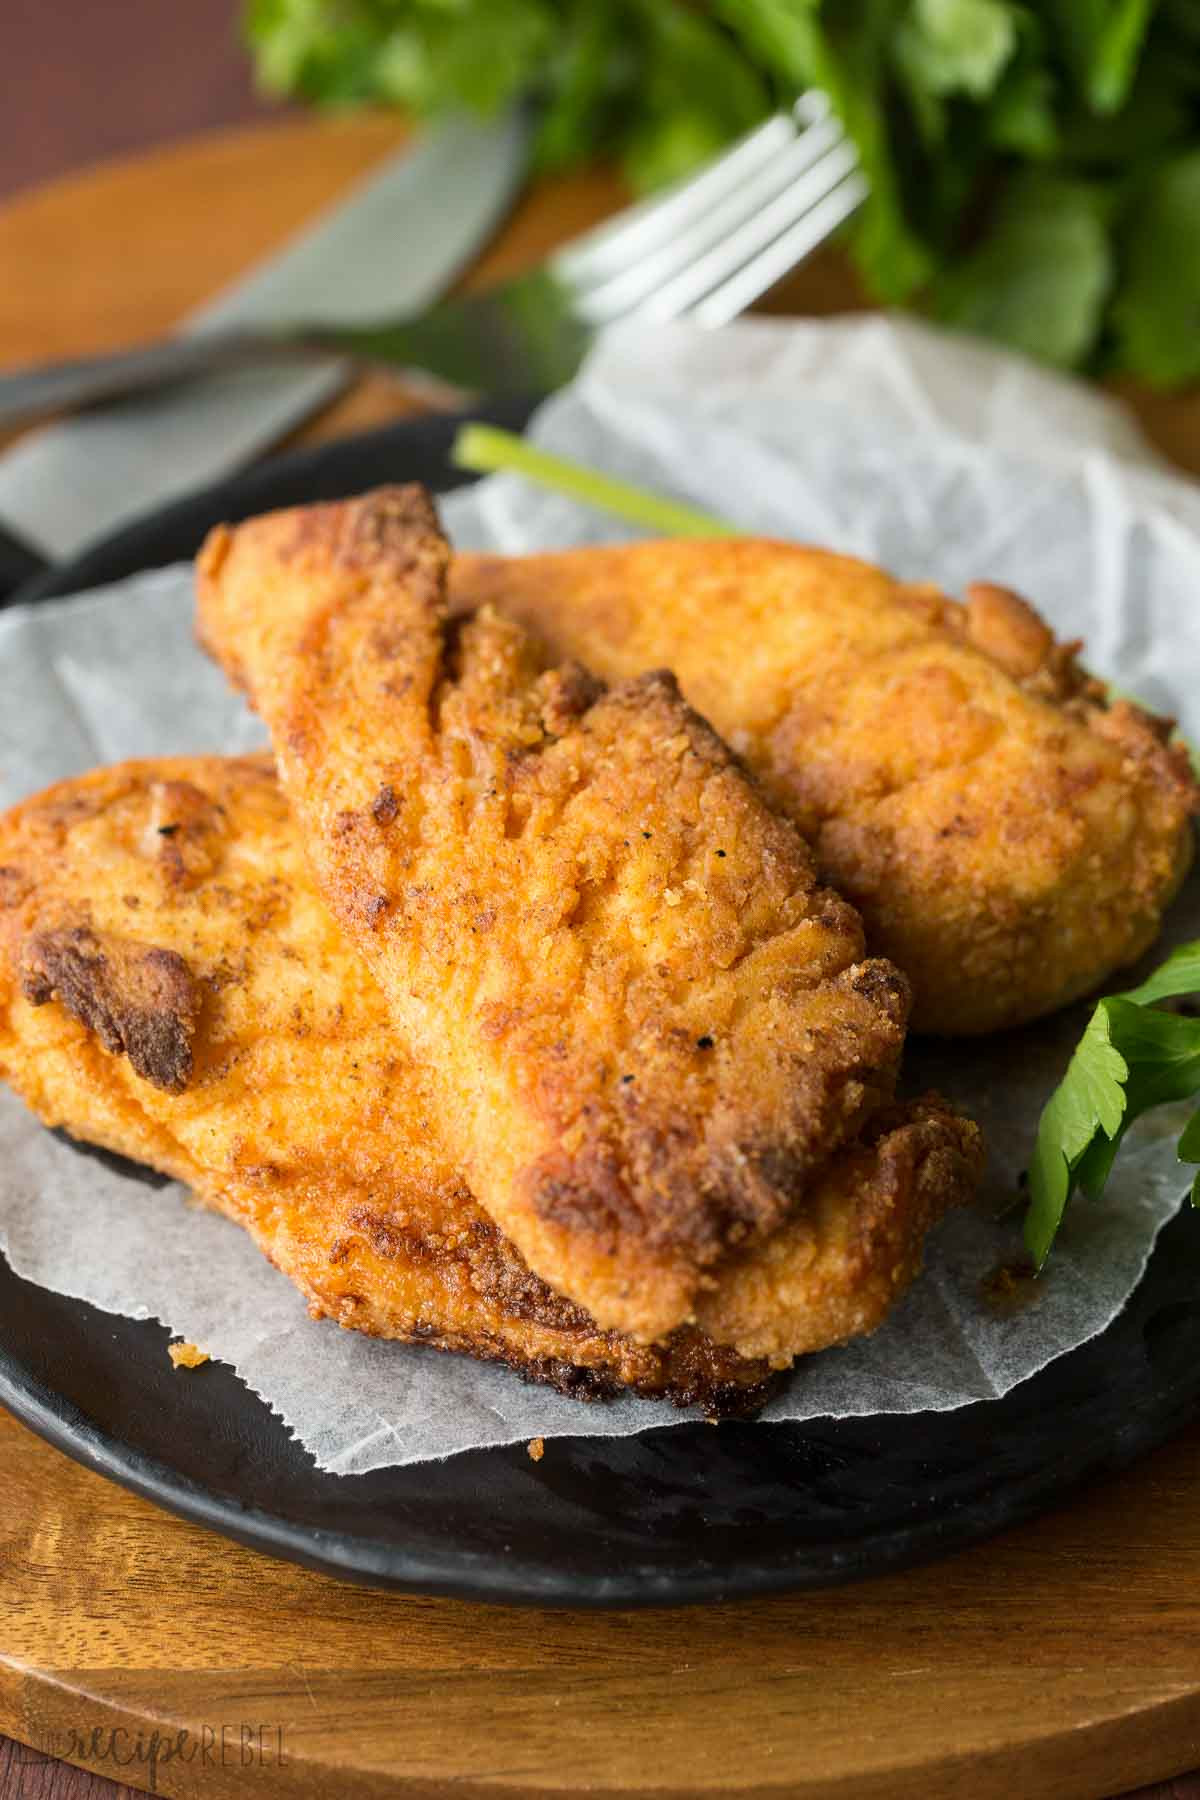 Oven Fried Chicken Recipes
 VIDEO The Best Oven Fried Chicken KFC Copycat